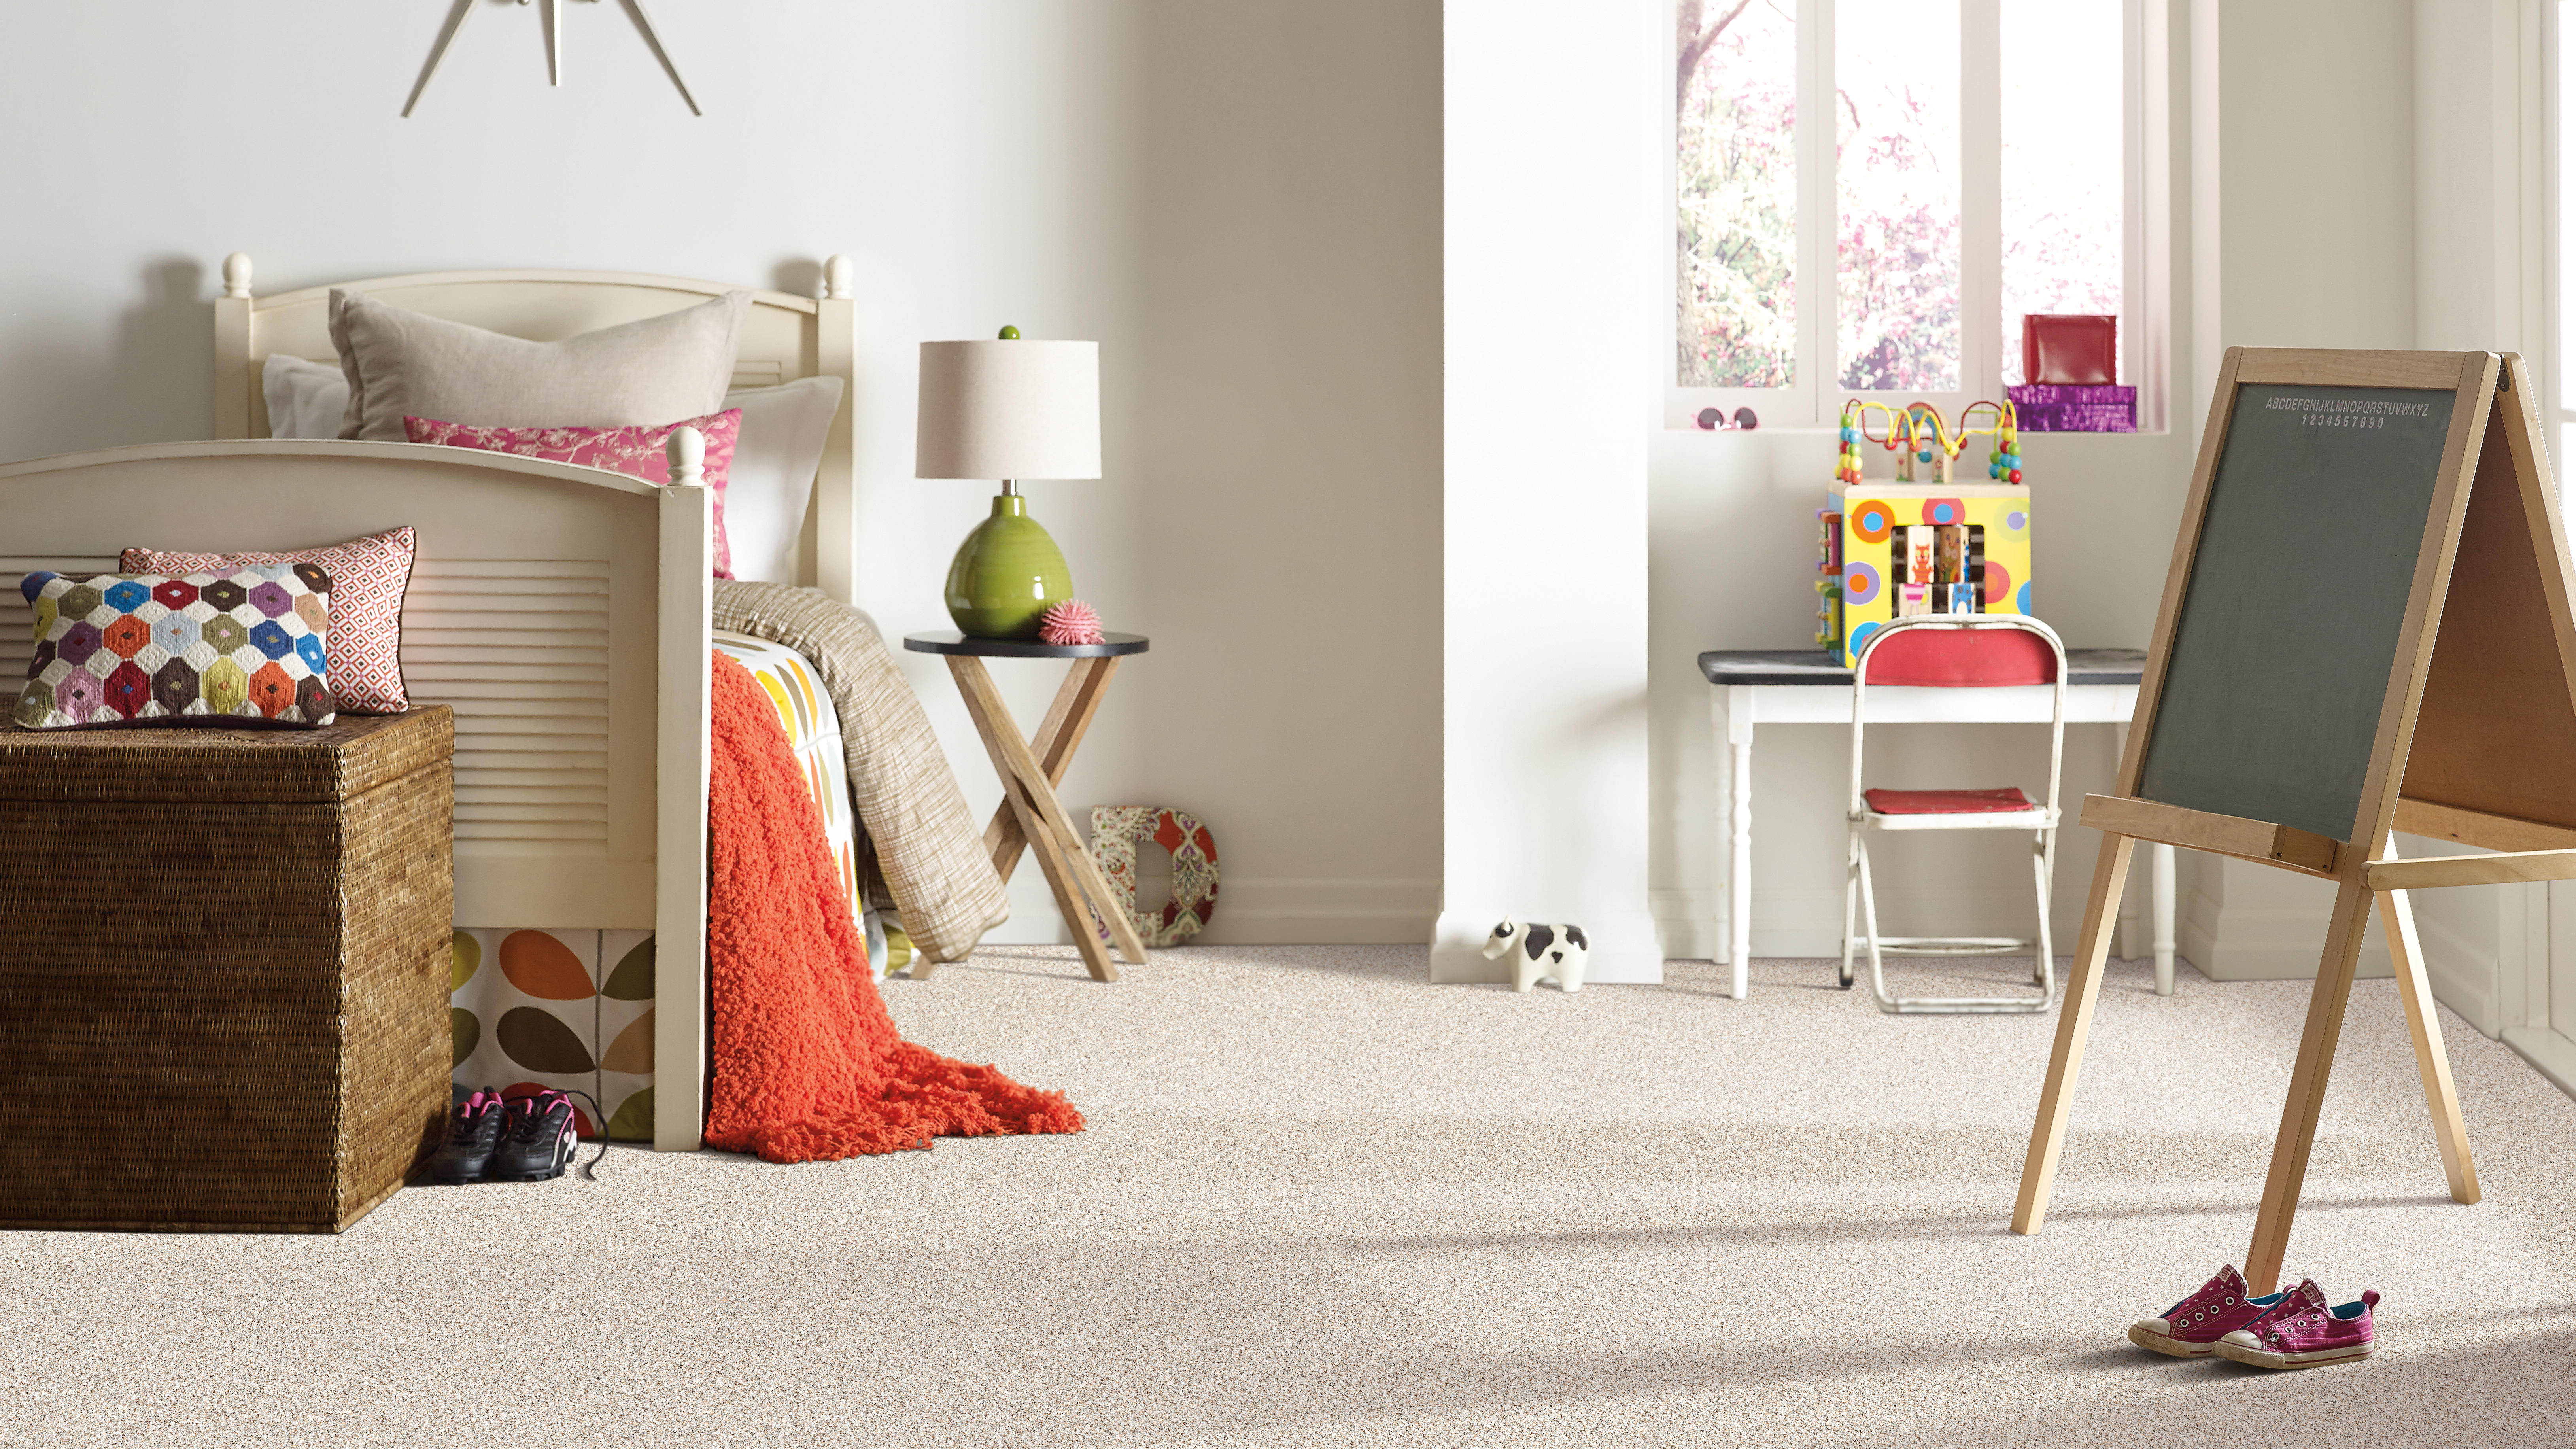 Carpet flooring in a kid's bedroom room, installation services available.